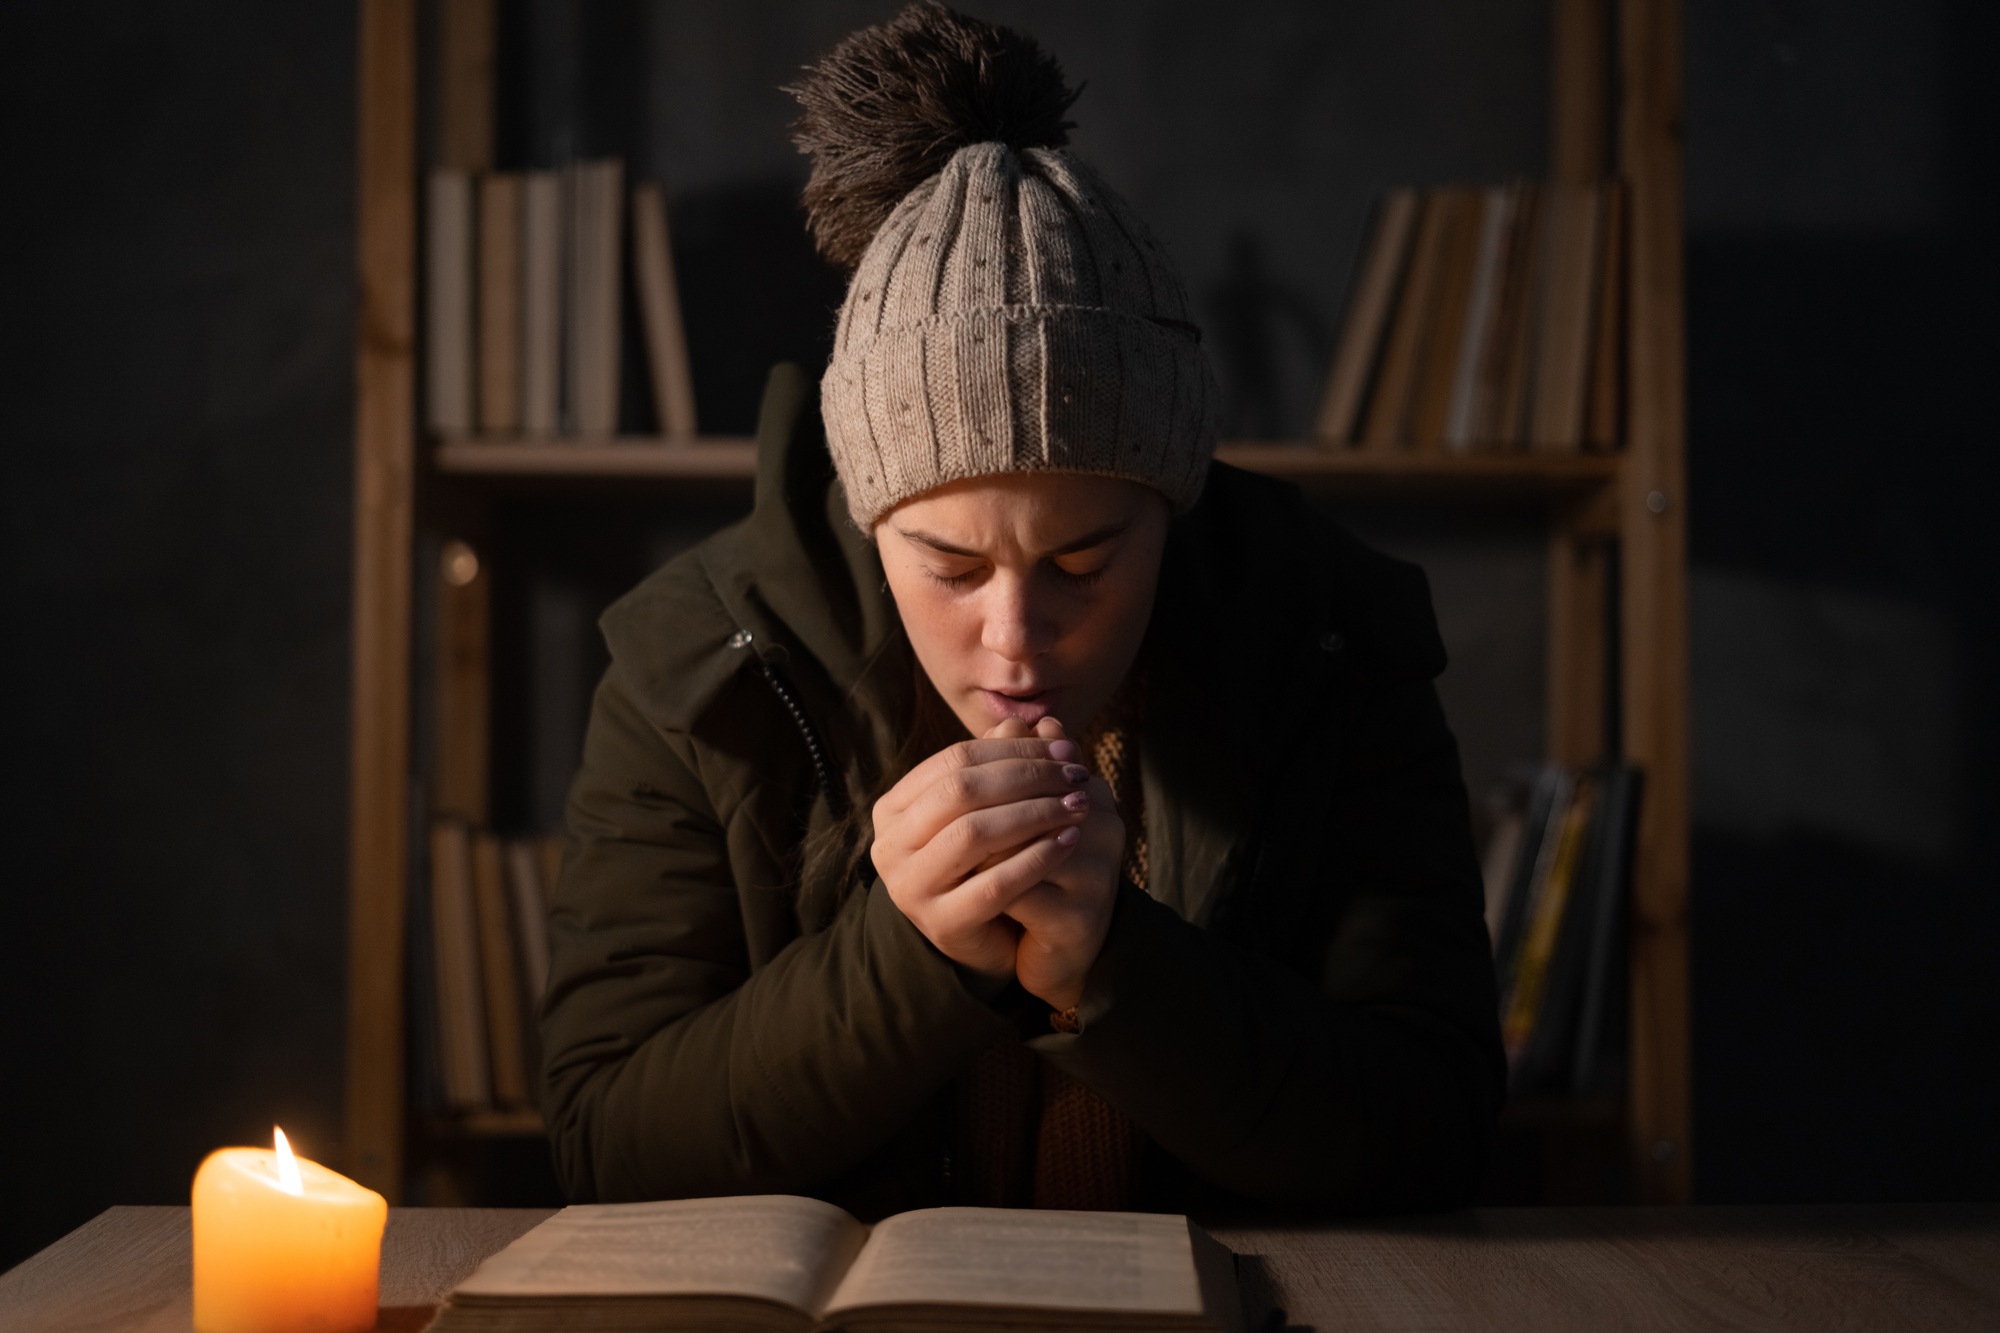 Freezing young woman in winter clothes warms her hands on lights with candles. Shutdown of heating and electricity, power outage, blackout, load shedding or energy crisis.